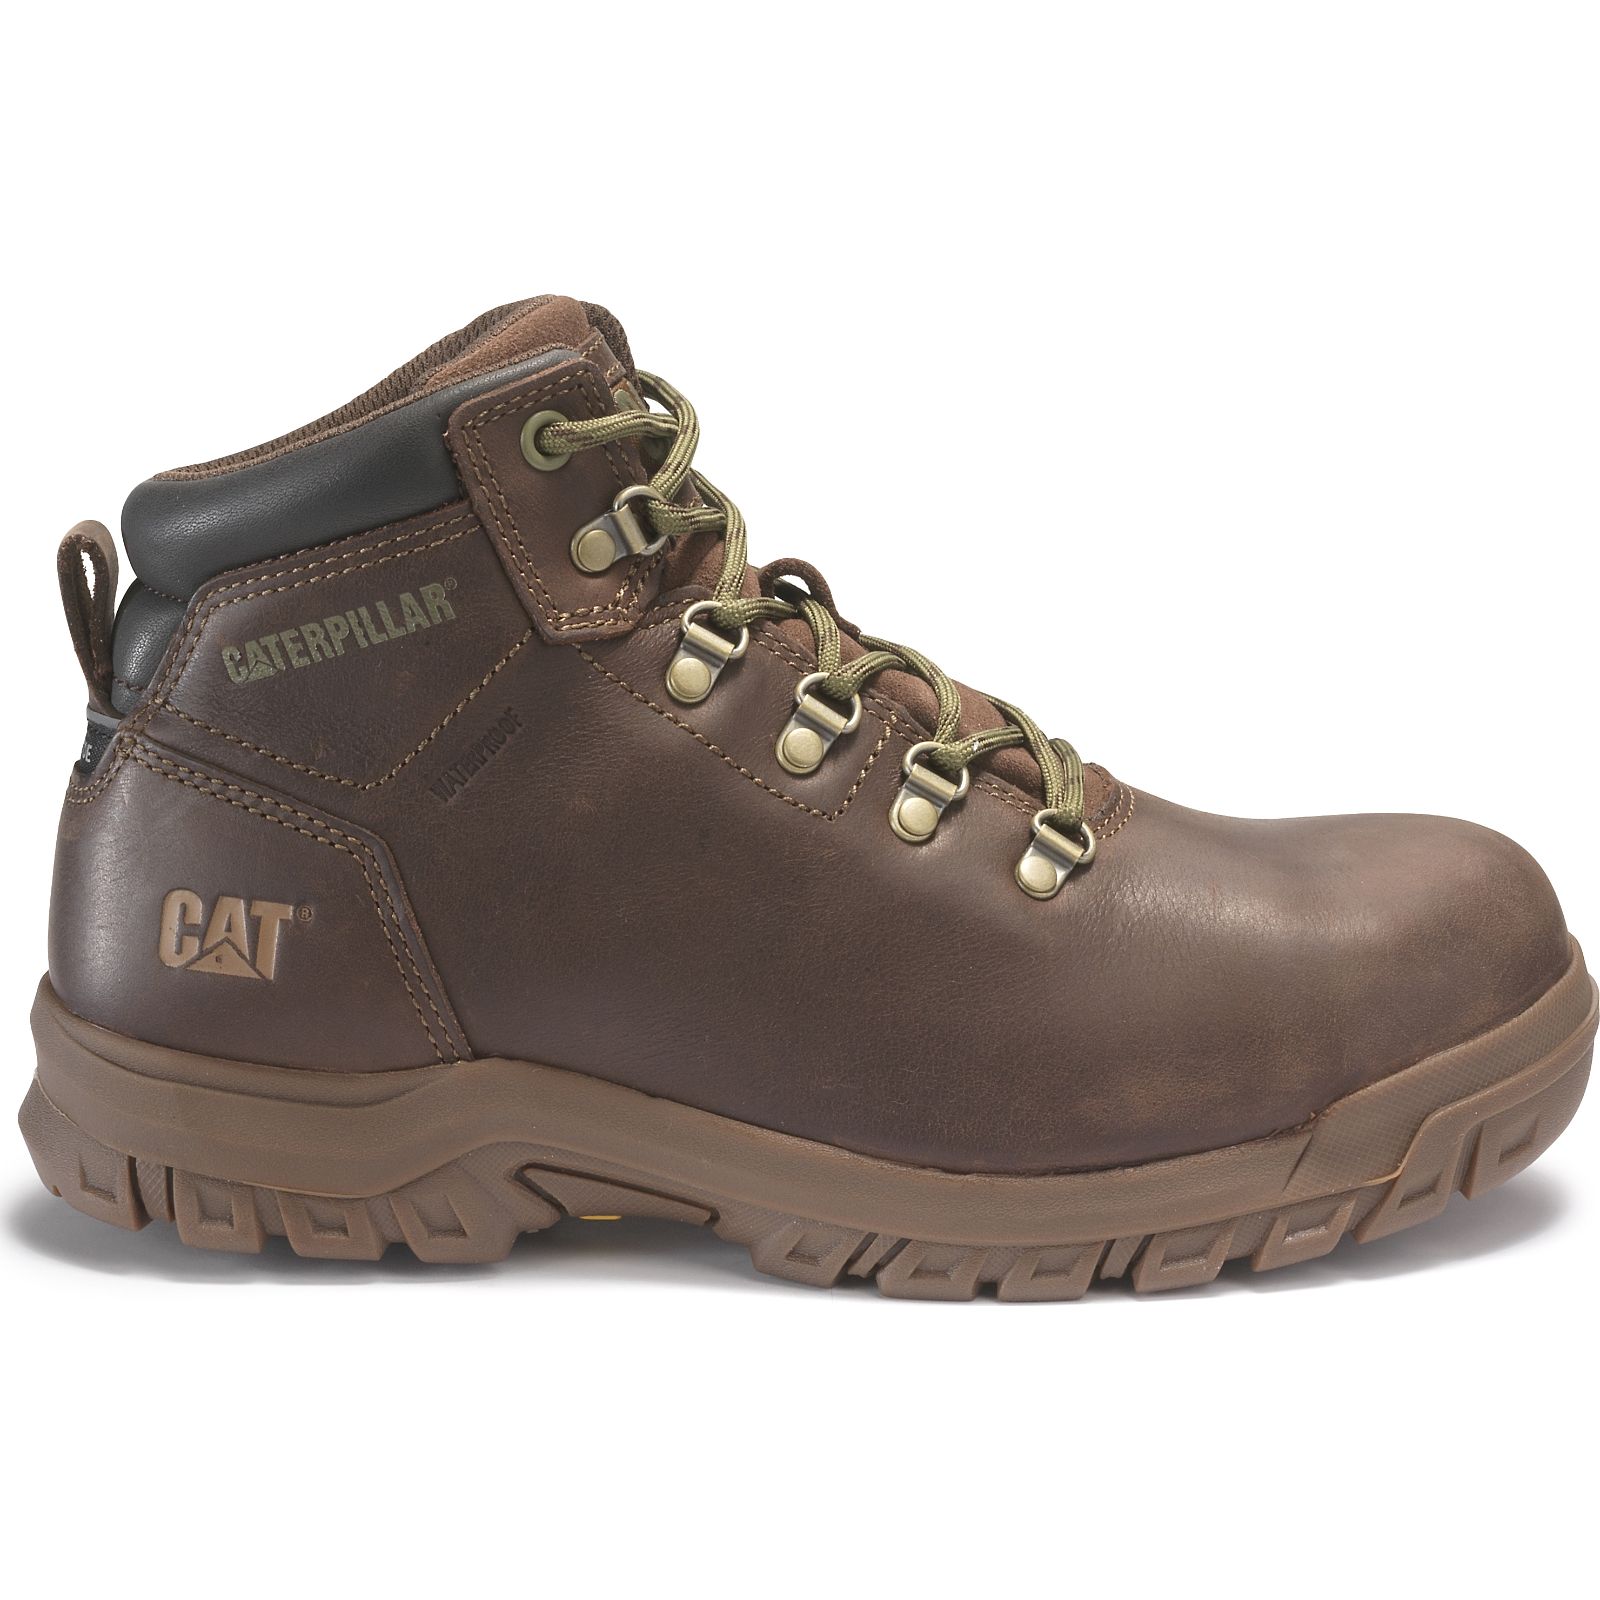 Caterpillar Mae Steel Toe S3 Hro Wr Sra Philippines - Womens Work Boots - Brown 35920NVYC